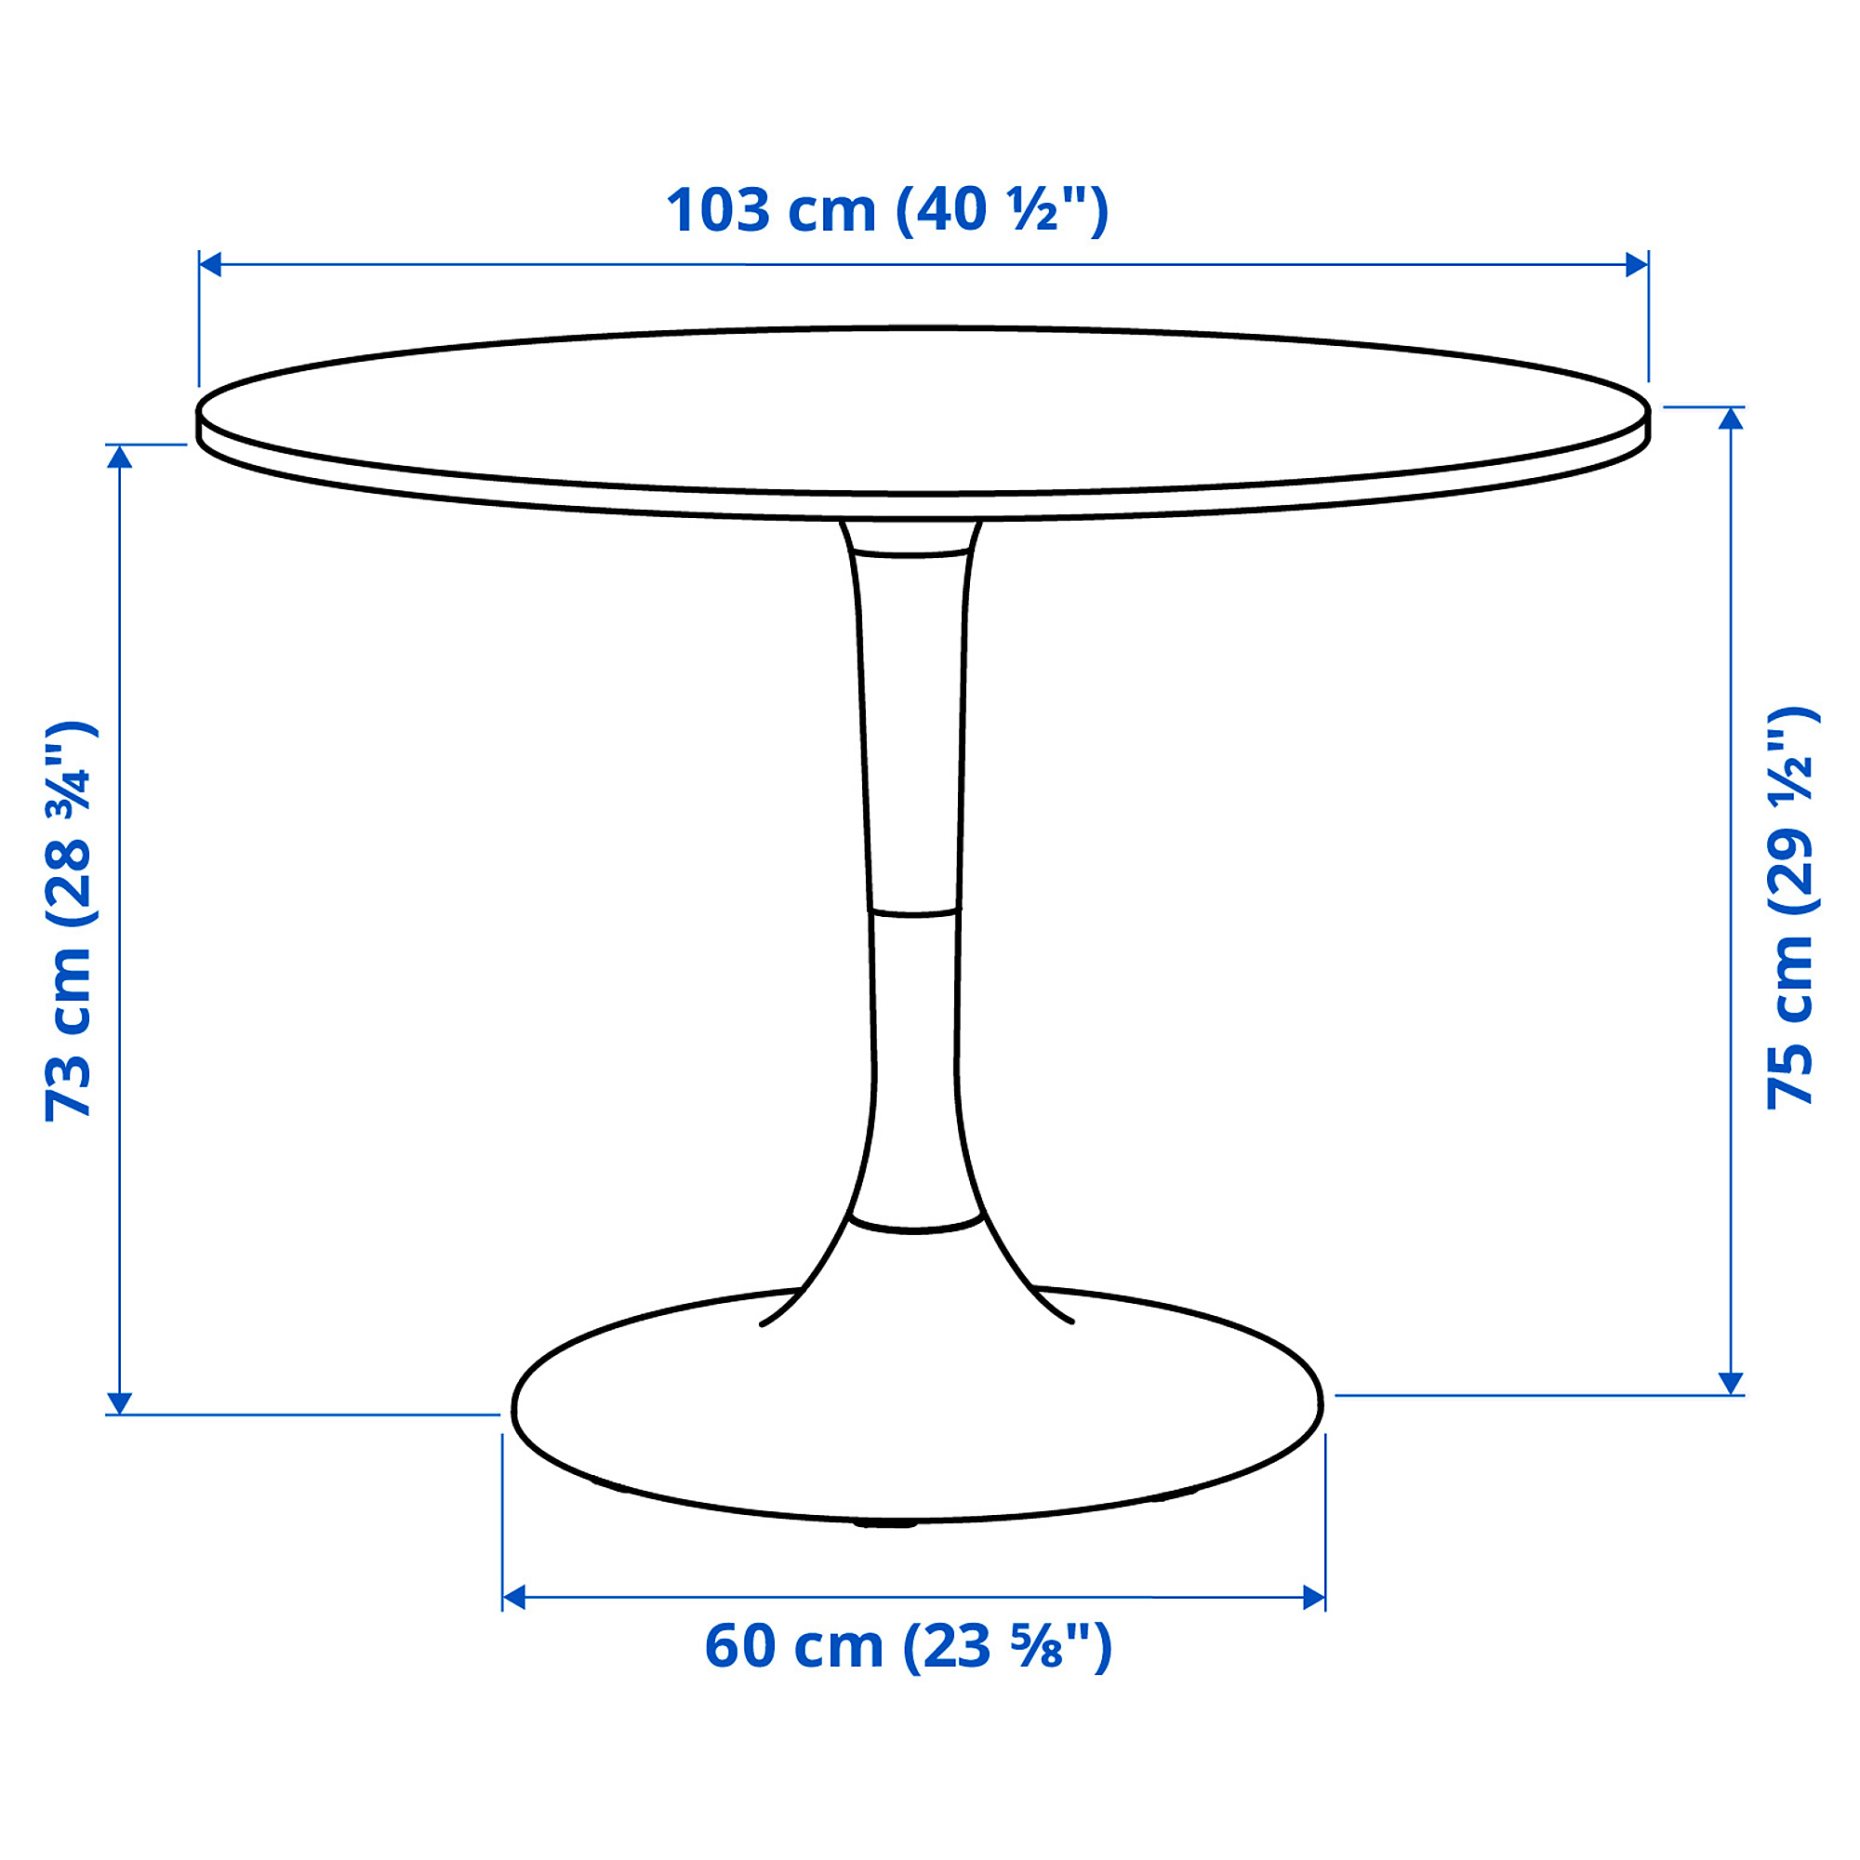 DOCKSTA/ALVSTA, table and 4 chairs, 103 cm, 394.815.74